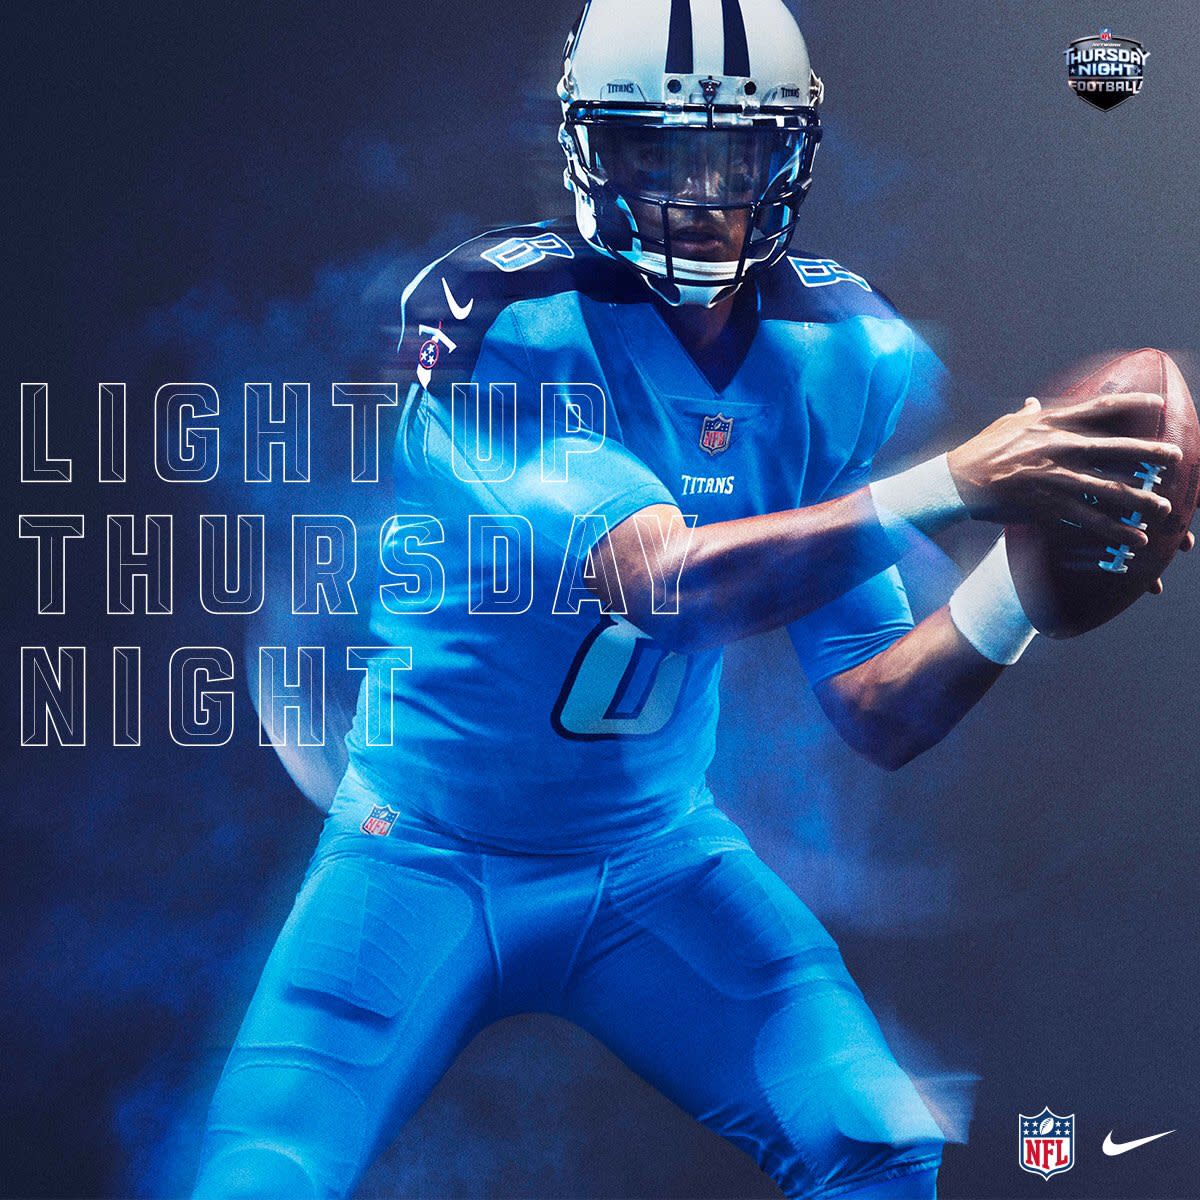 Our picks for top 5 and bottom 5 NFL 'Color Rush' jerseys